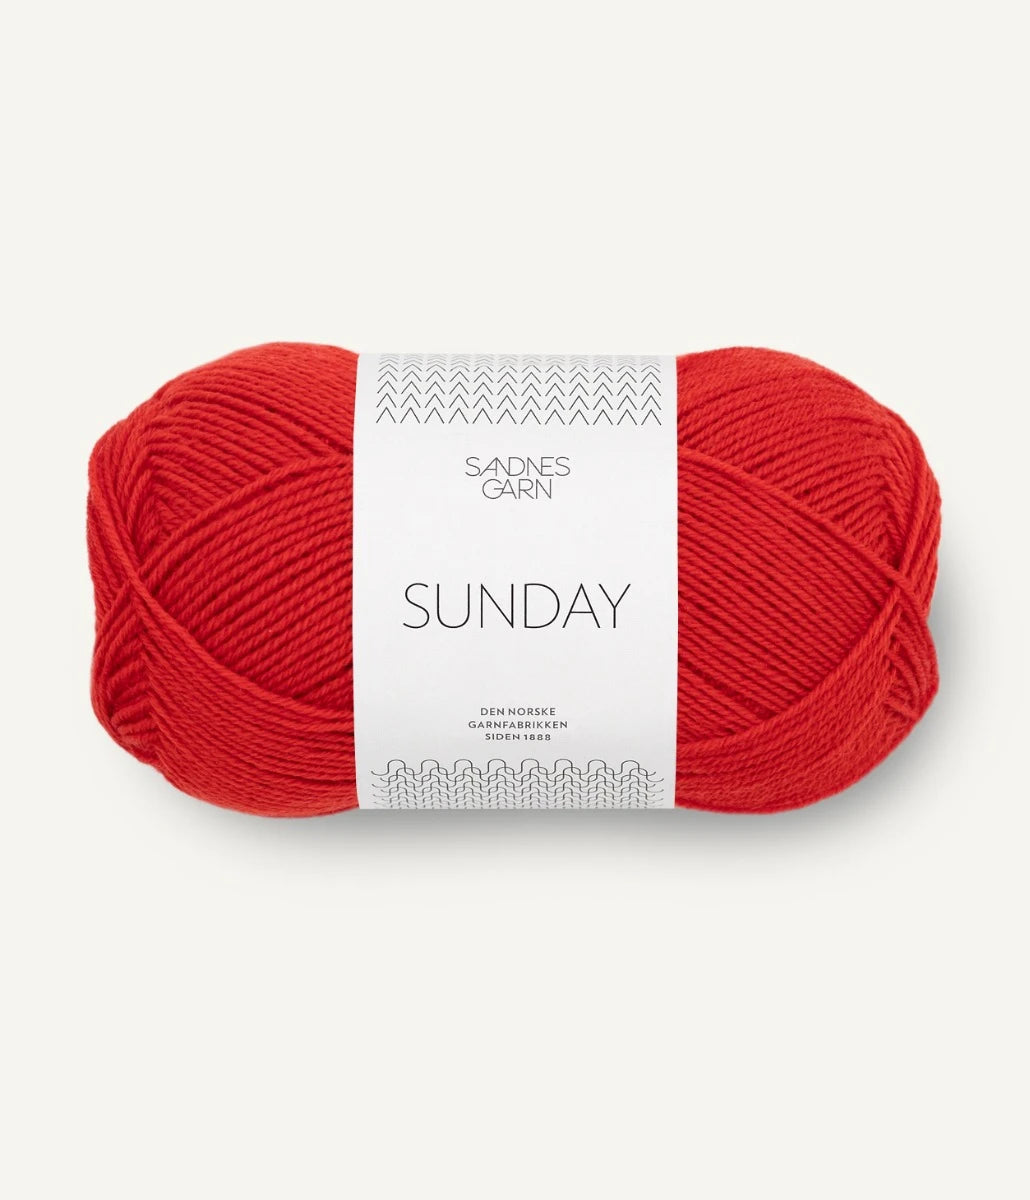 NEW SUNDAY by Sandnes - Scarlet Red 4018